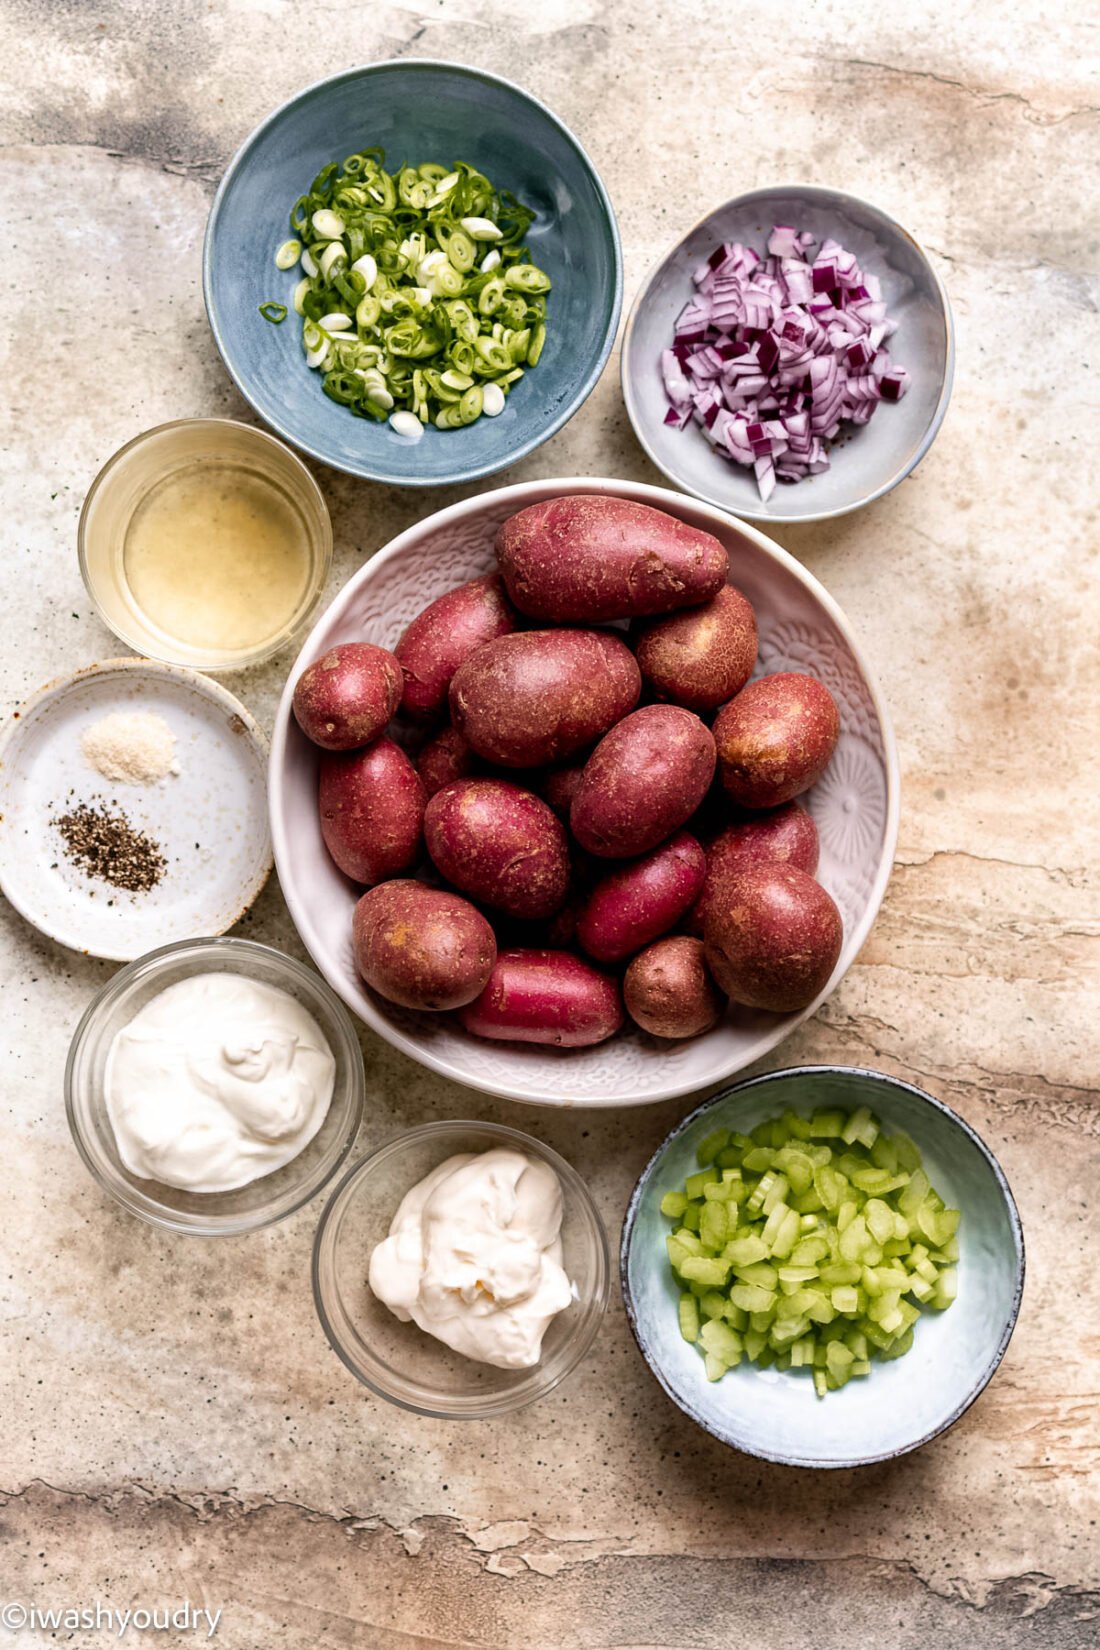 Ingredients for red potato salad in ceramic bowls on marble countertop. 